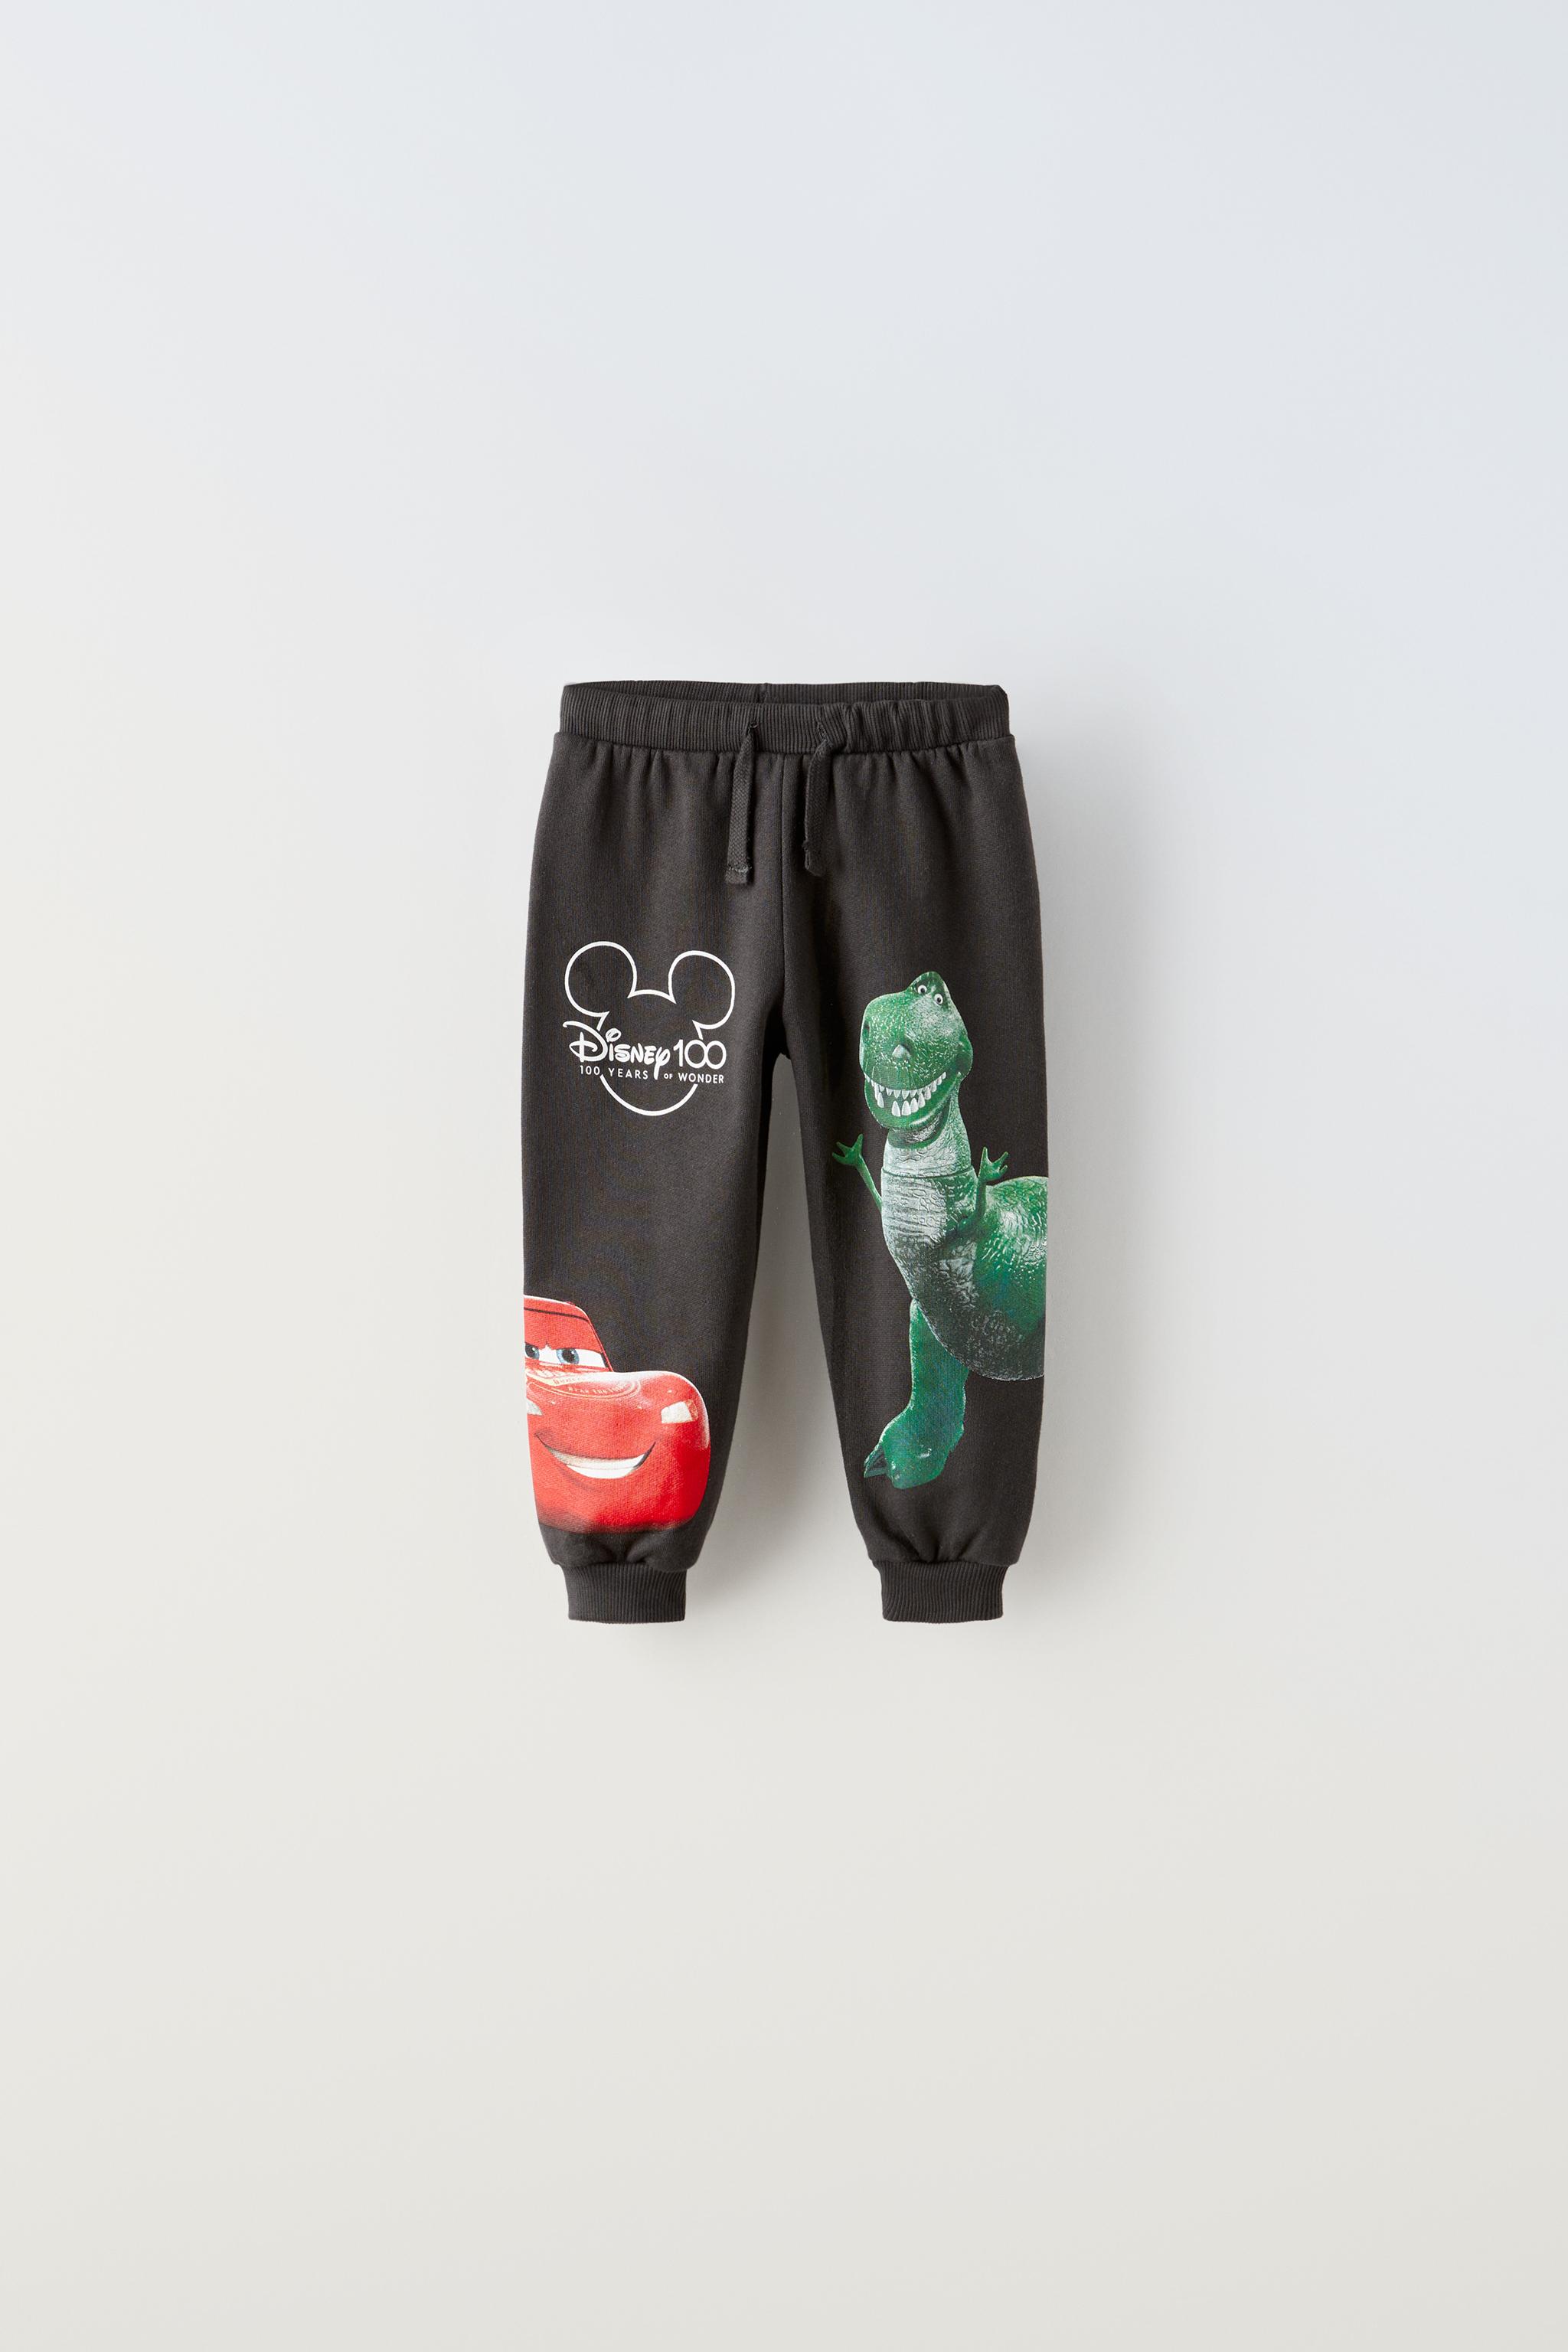 MICKEY MOUSE AND FRIENDS © DISNEY 100TH ANNIVERSARY PLUSH PANTS